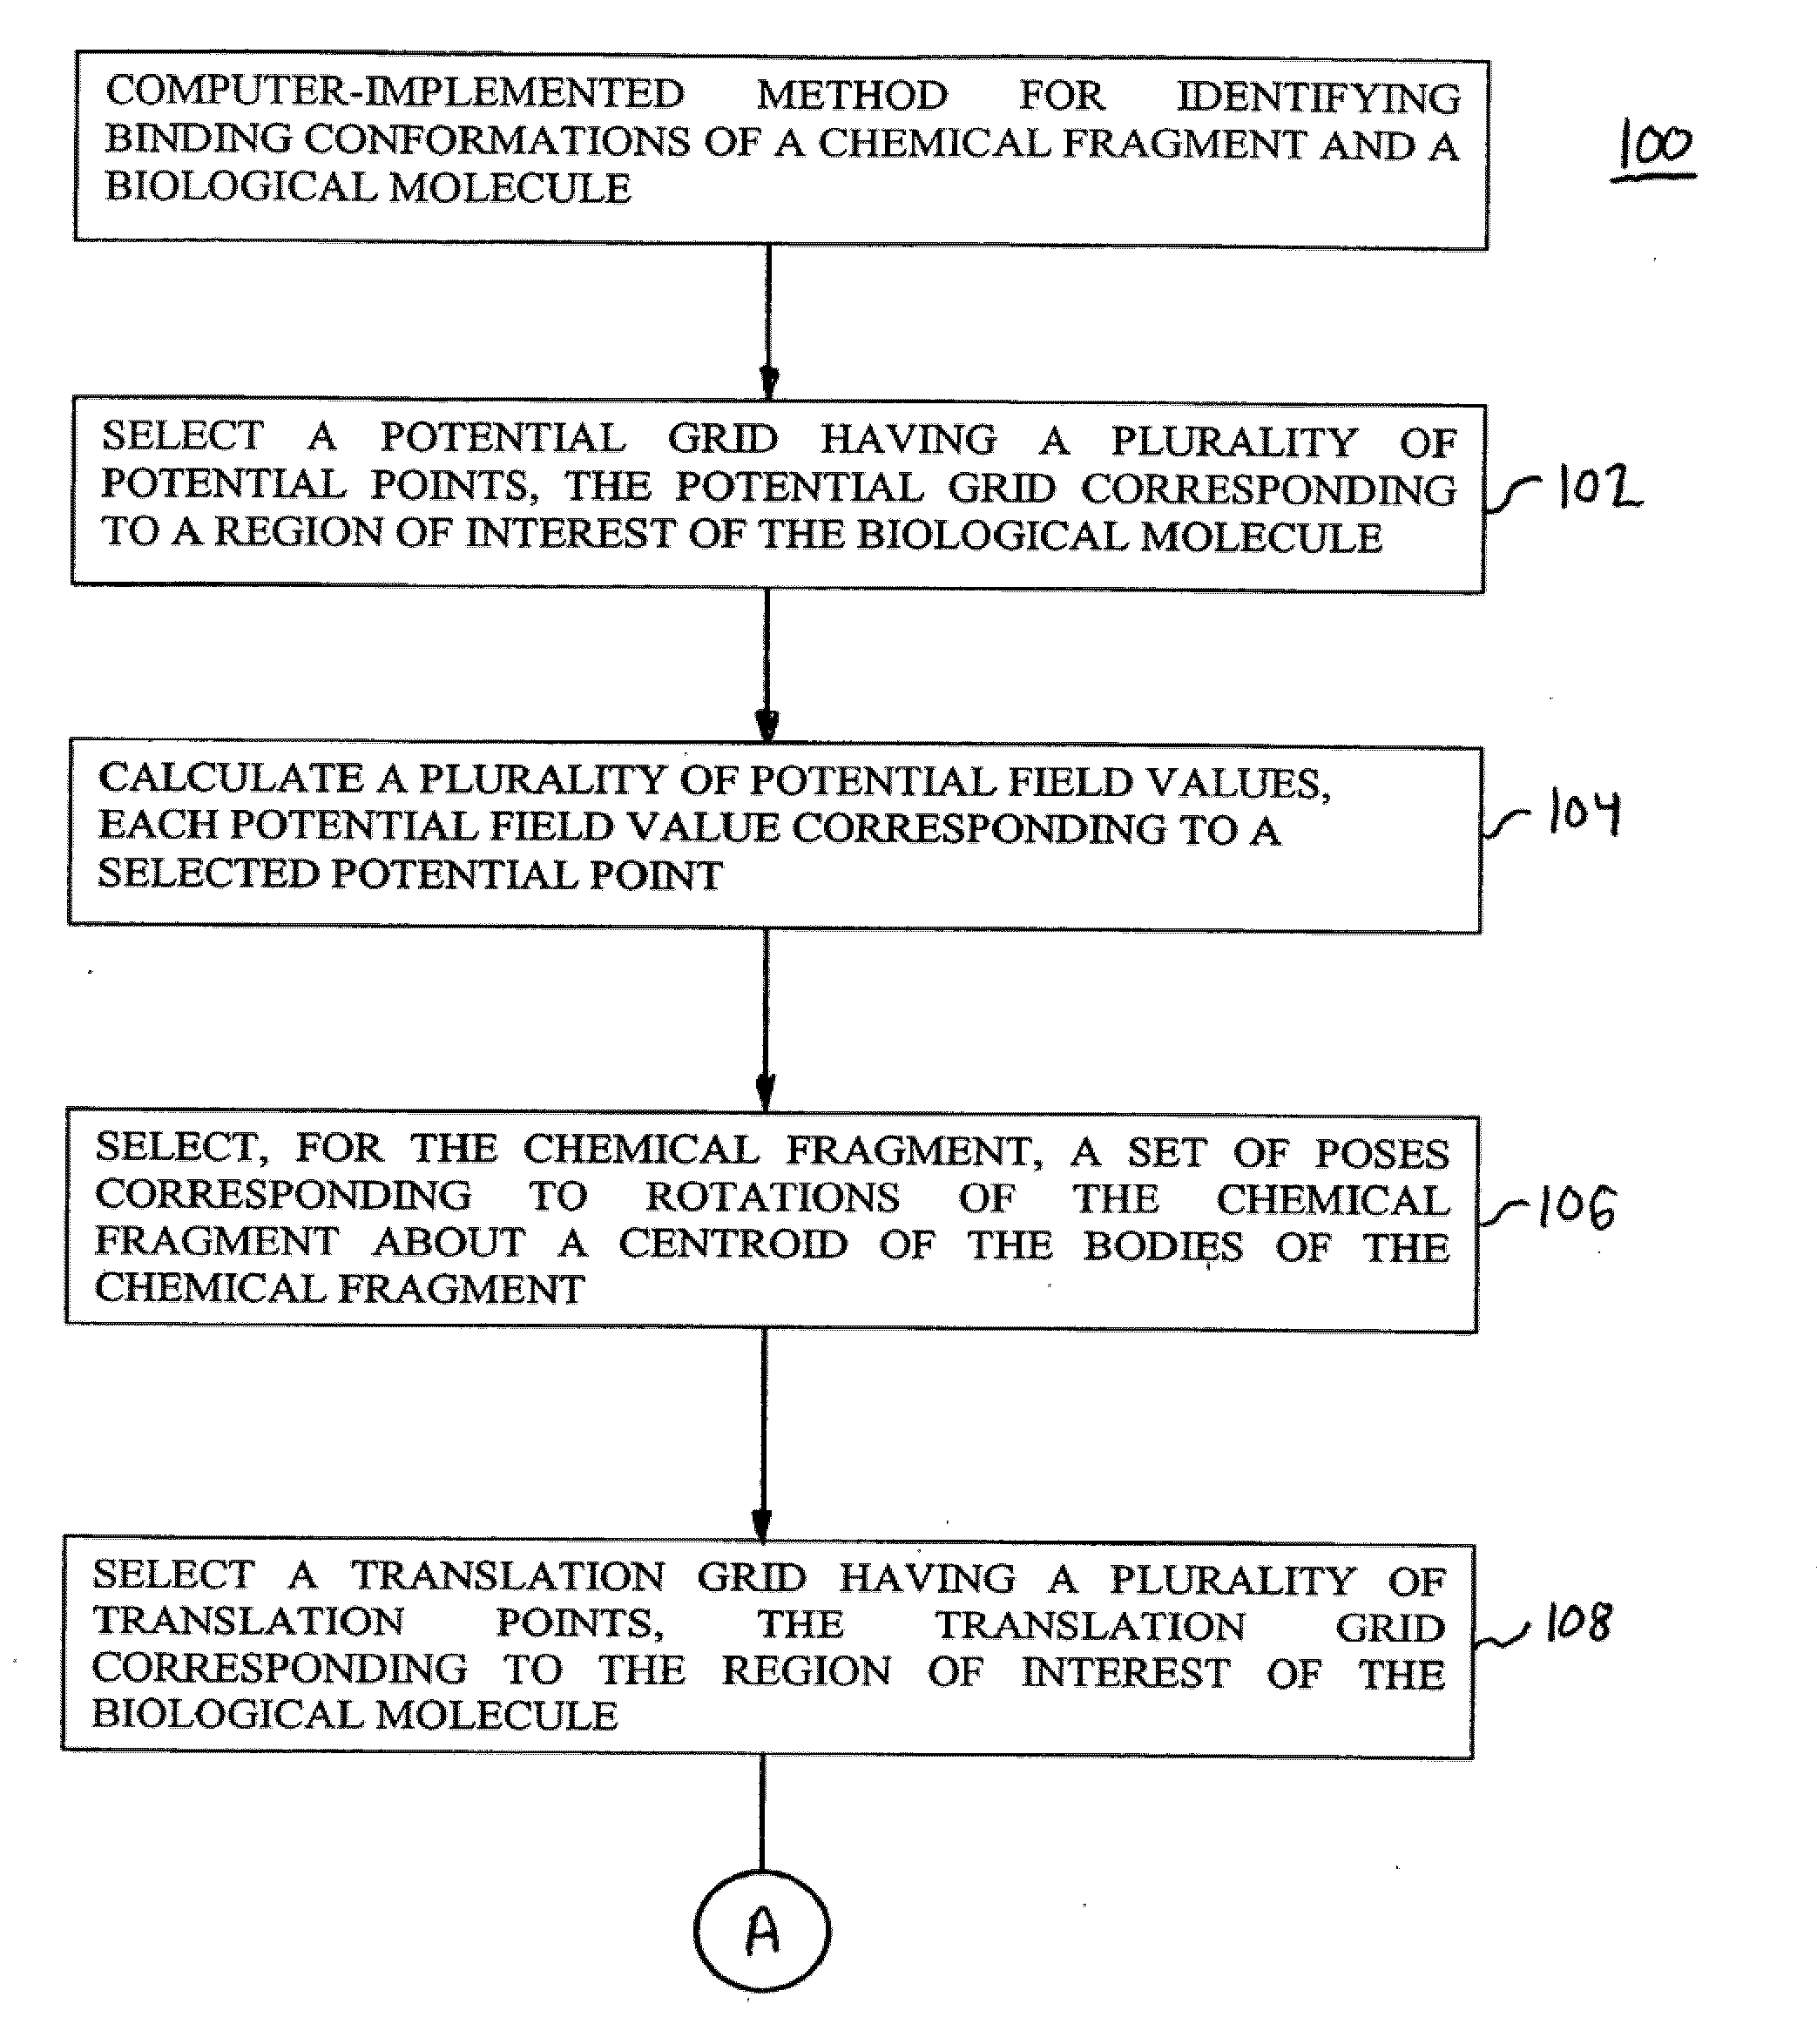 Method, system, and computer program product for identifying binding conformations of chemical fragments and biological molecules